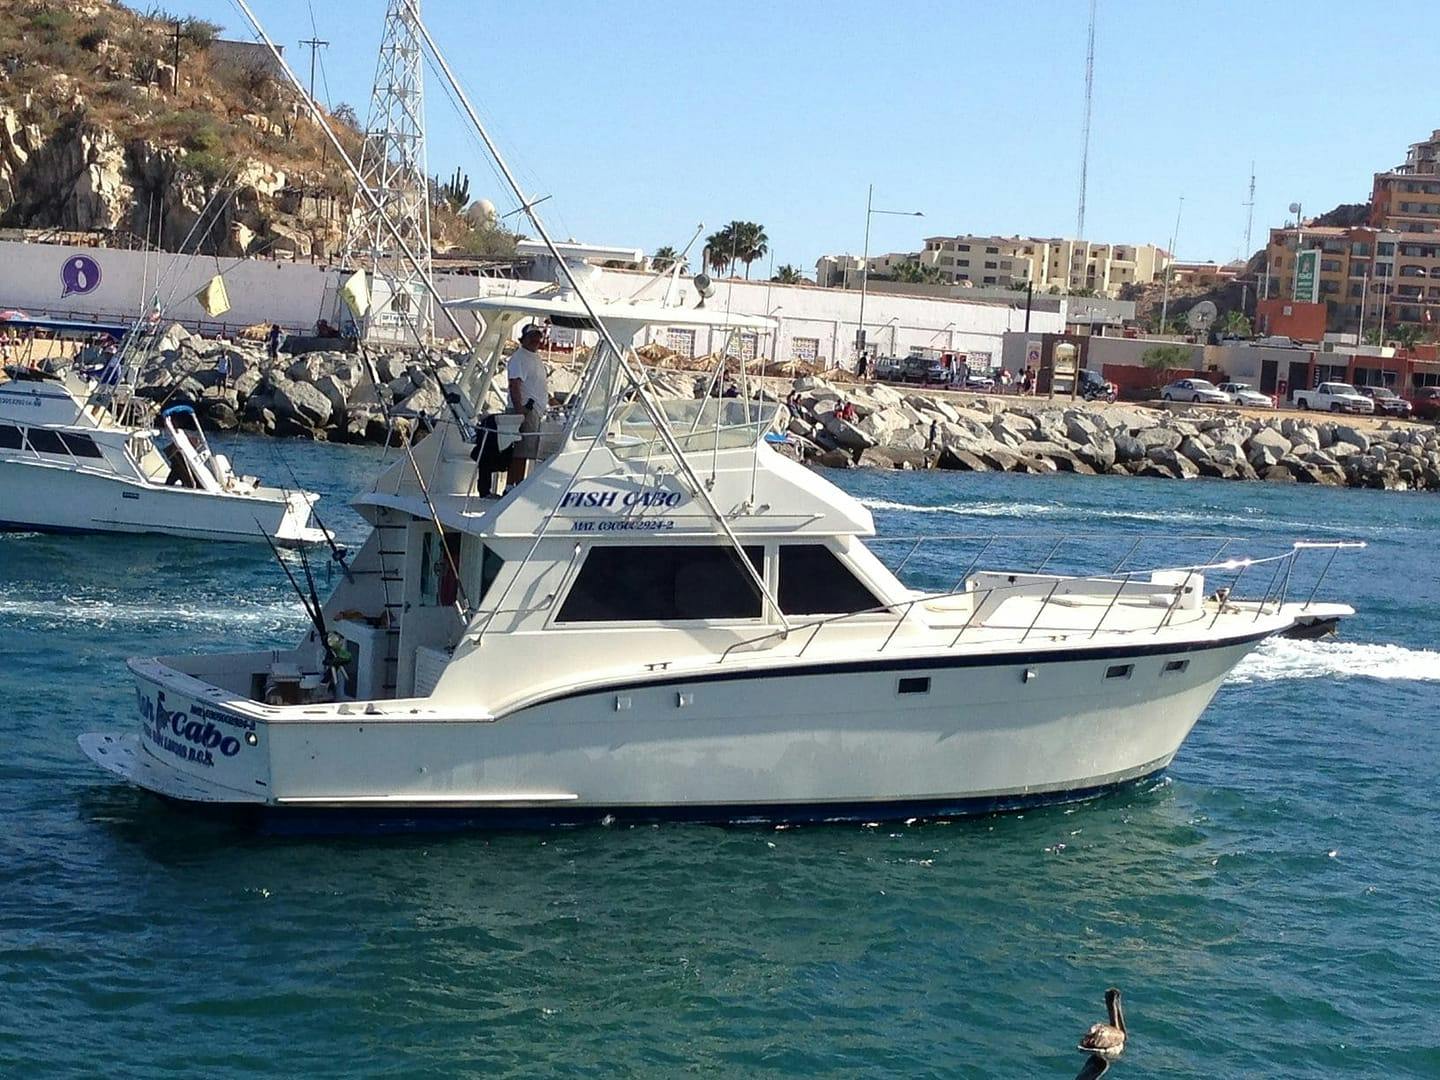 43ft Fish Cabo fishing charter